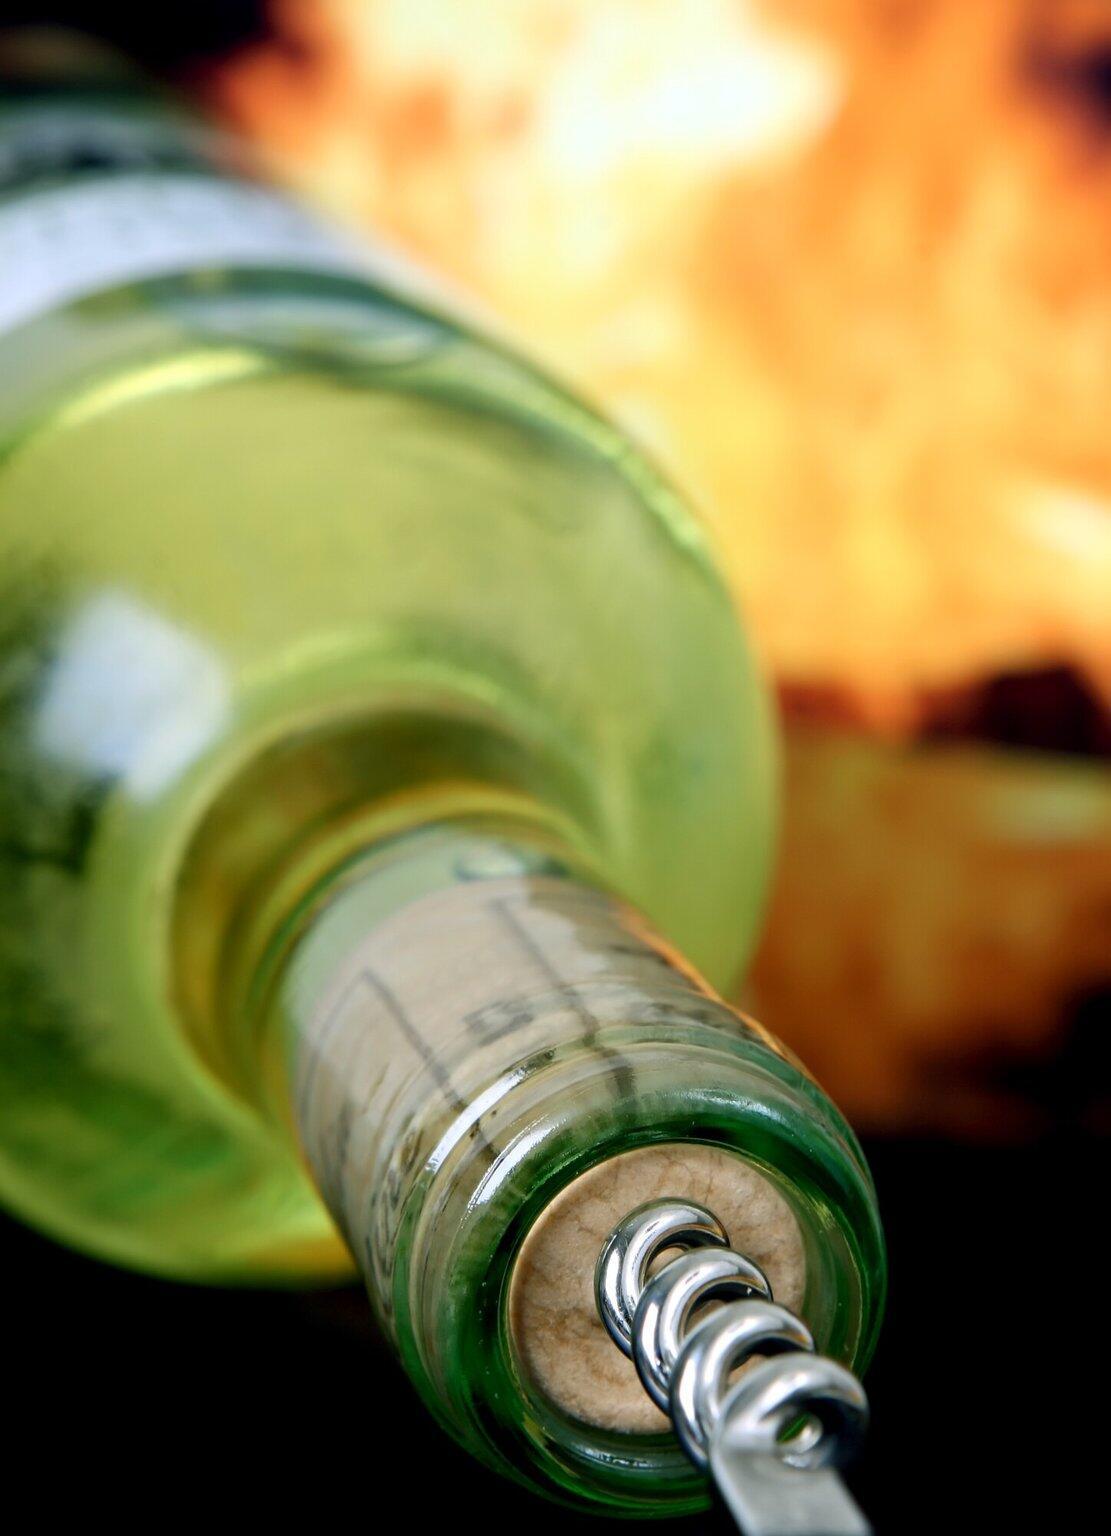 Sanitizing and Packaging Your Wine Bottle Glass